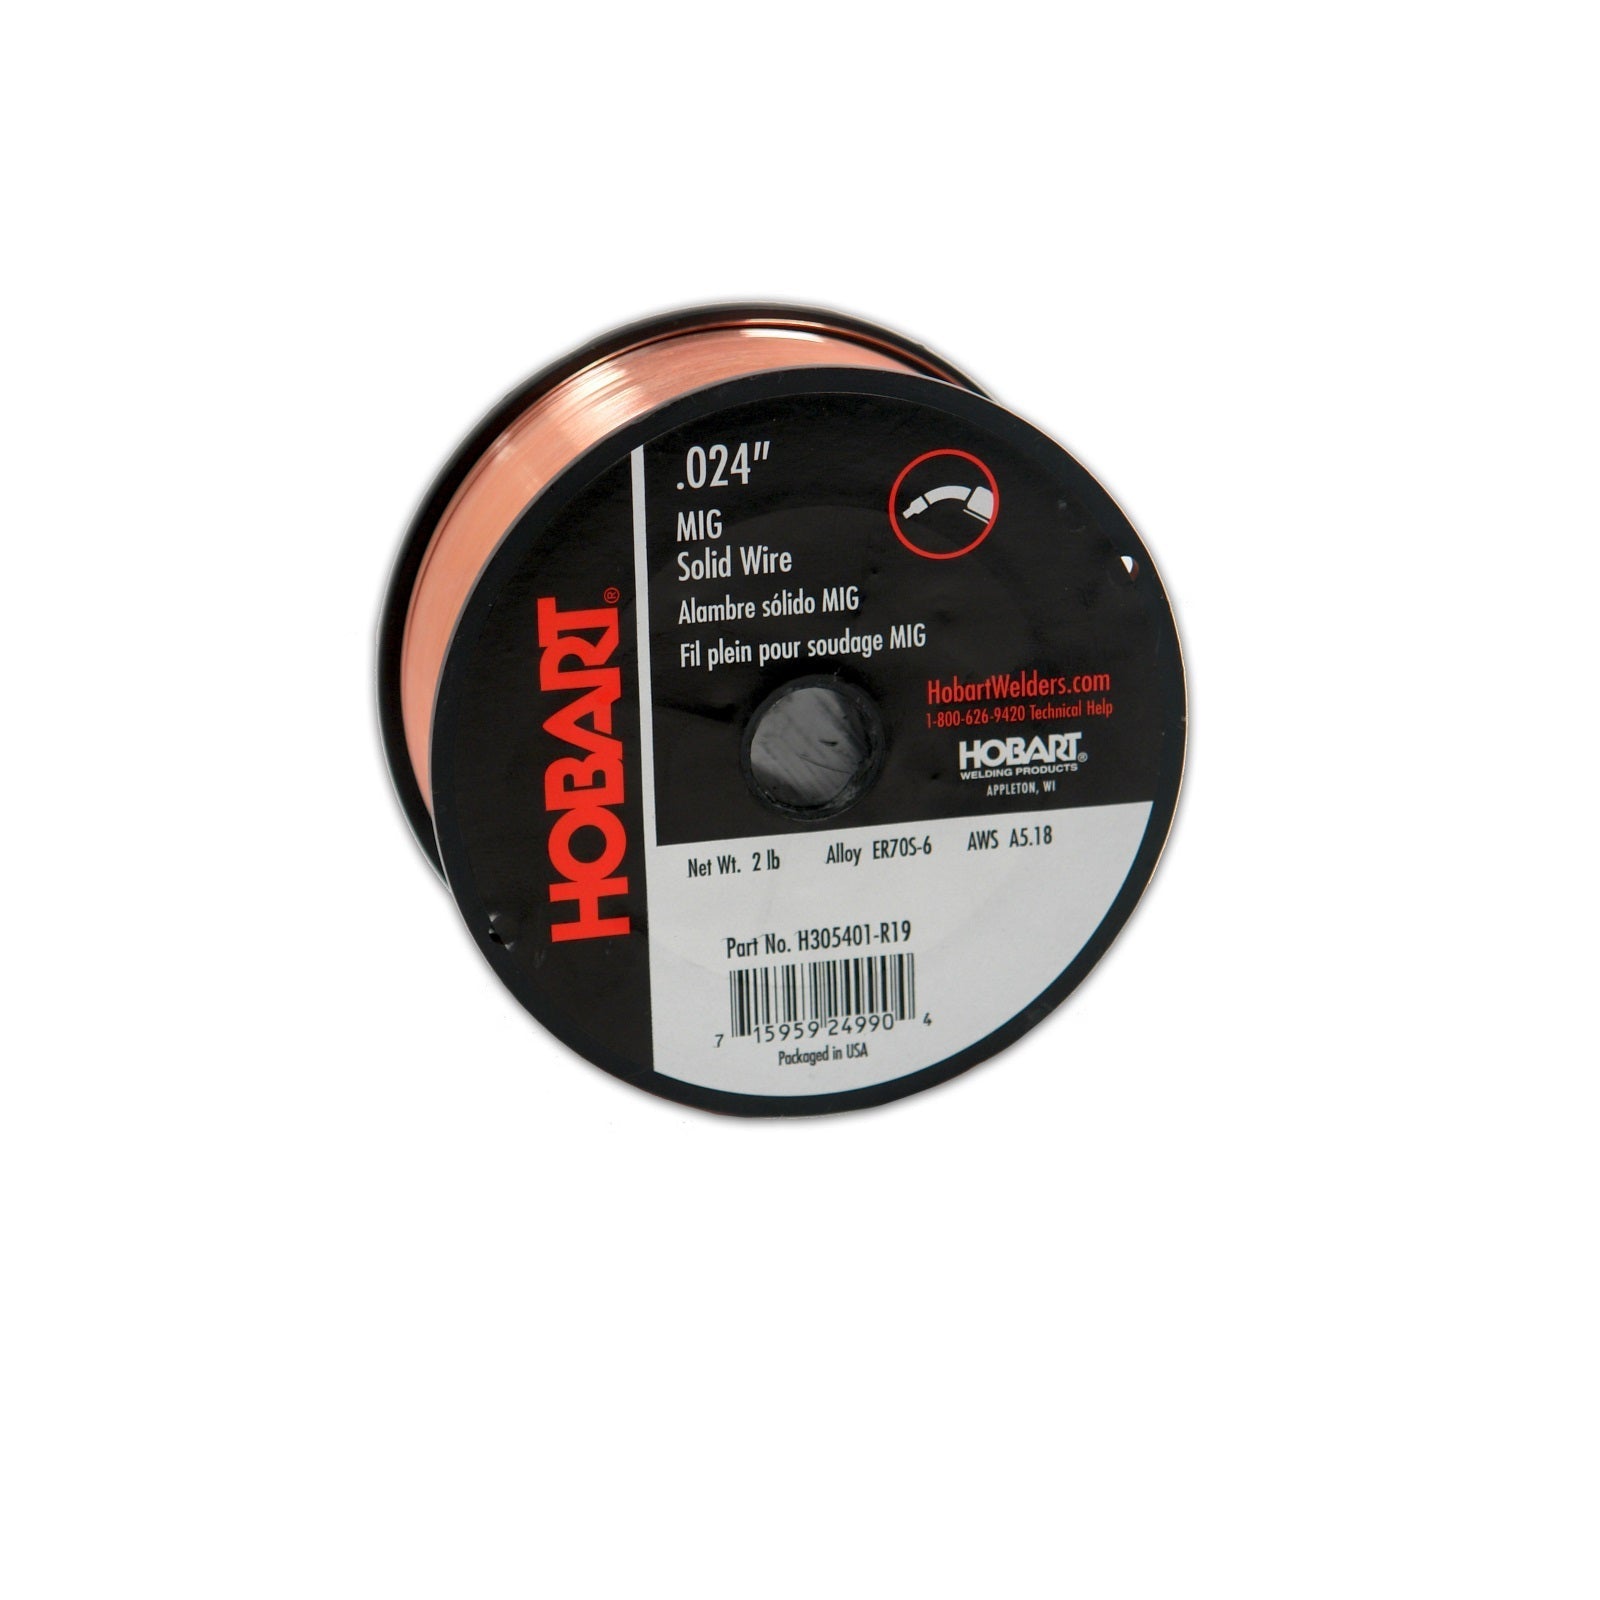 Hobart ER 70S6 MIG Wire .024 X 2 Lb (4") Spool